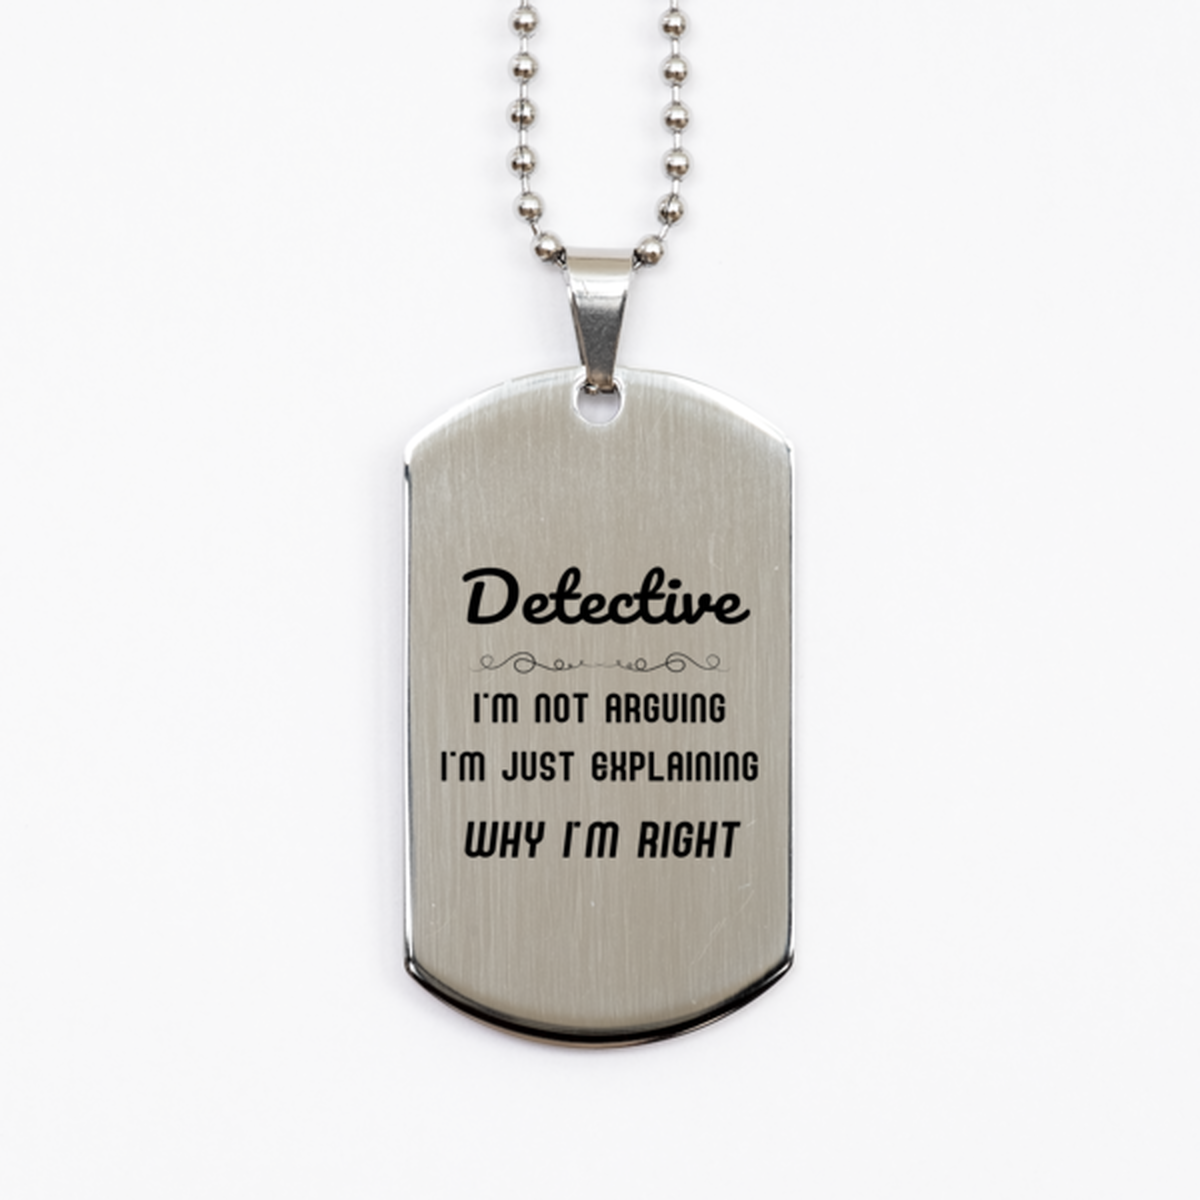 Detective I'm not Arguing. I'm Just Explaining Why I'm RIGHT Silver Dog Tag, Funny Saying Quote Detective Gifts For Detective Graduation Birthday Christmas Gifts for Men Women Coworker